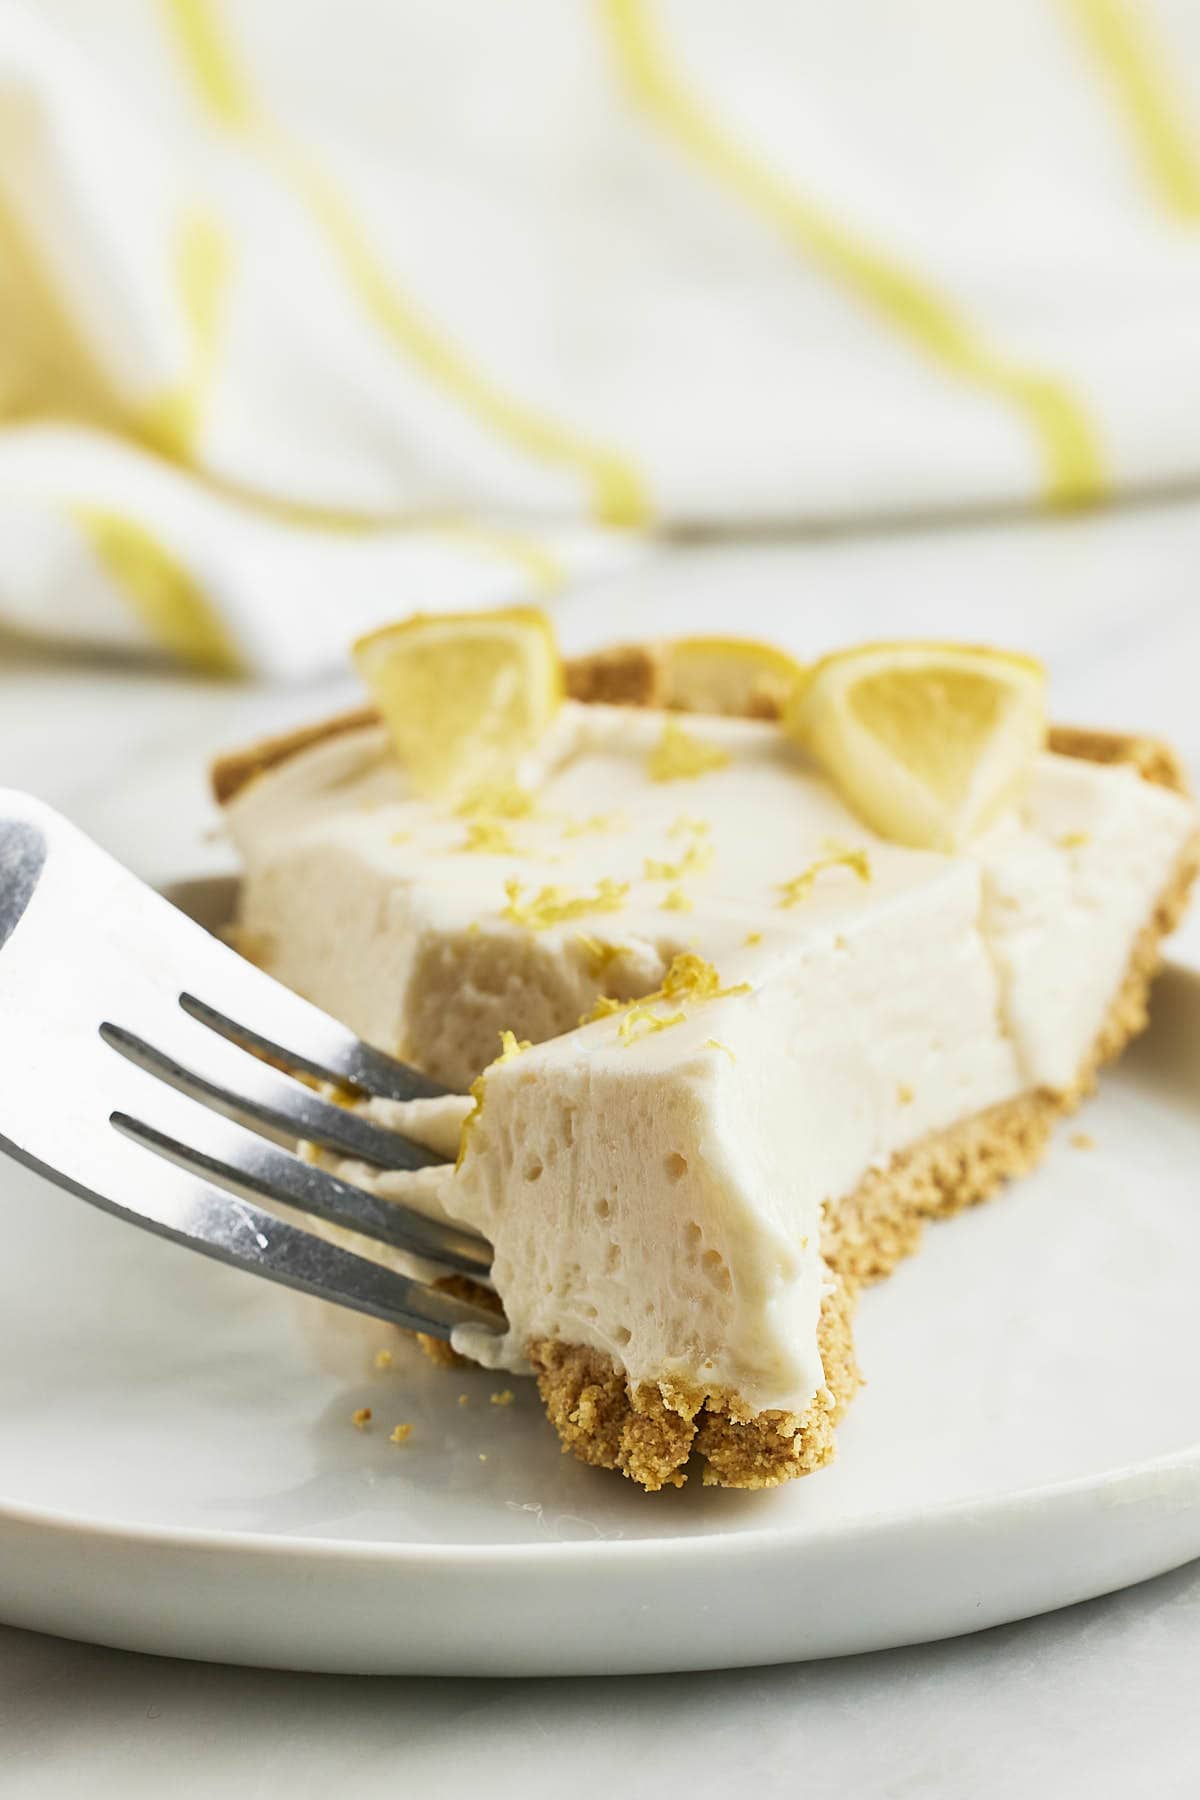 Digging into a slice of Lemon Cheesecake.